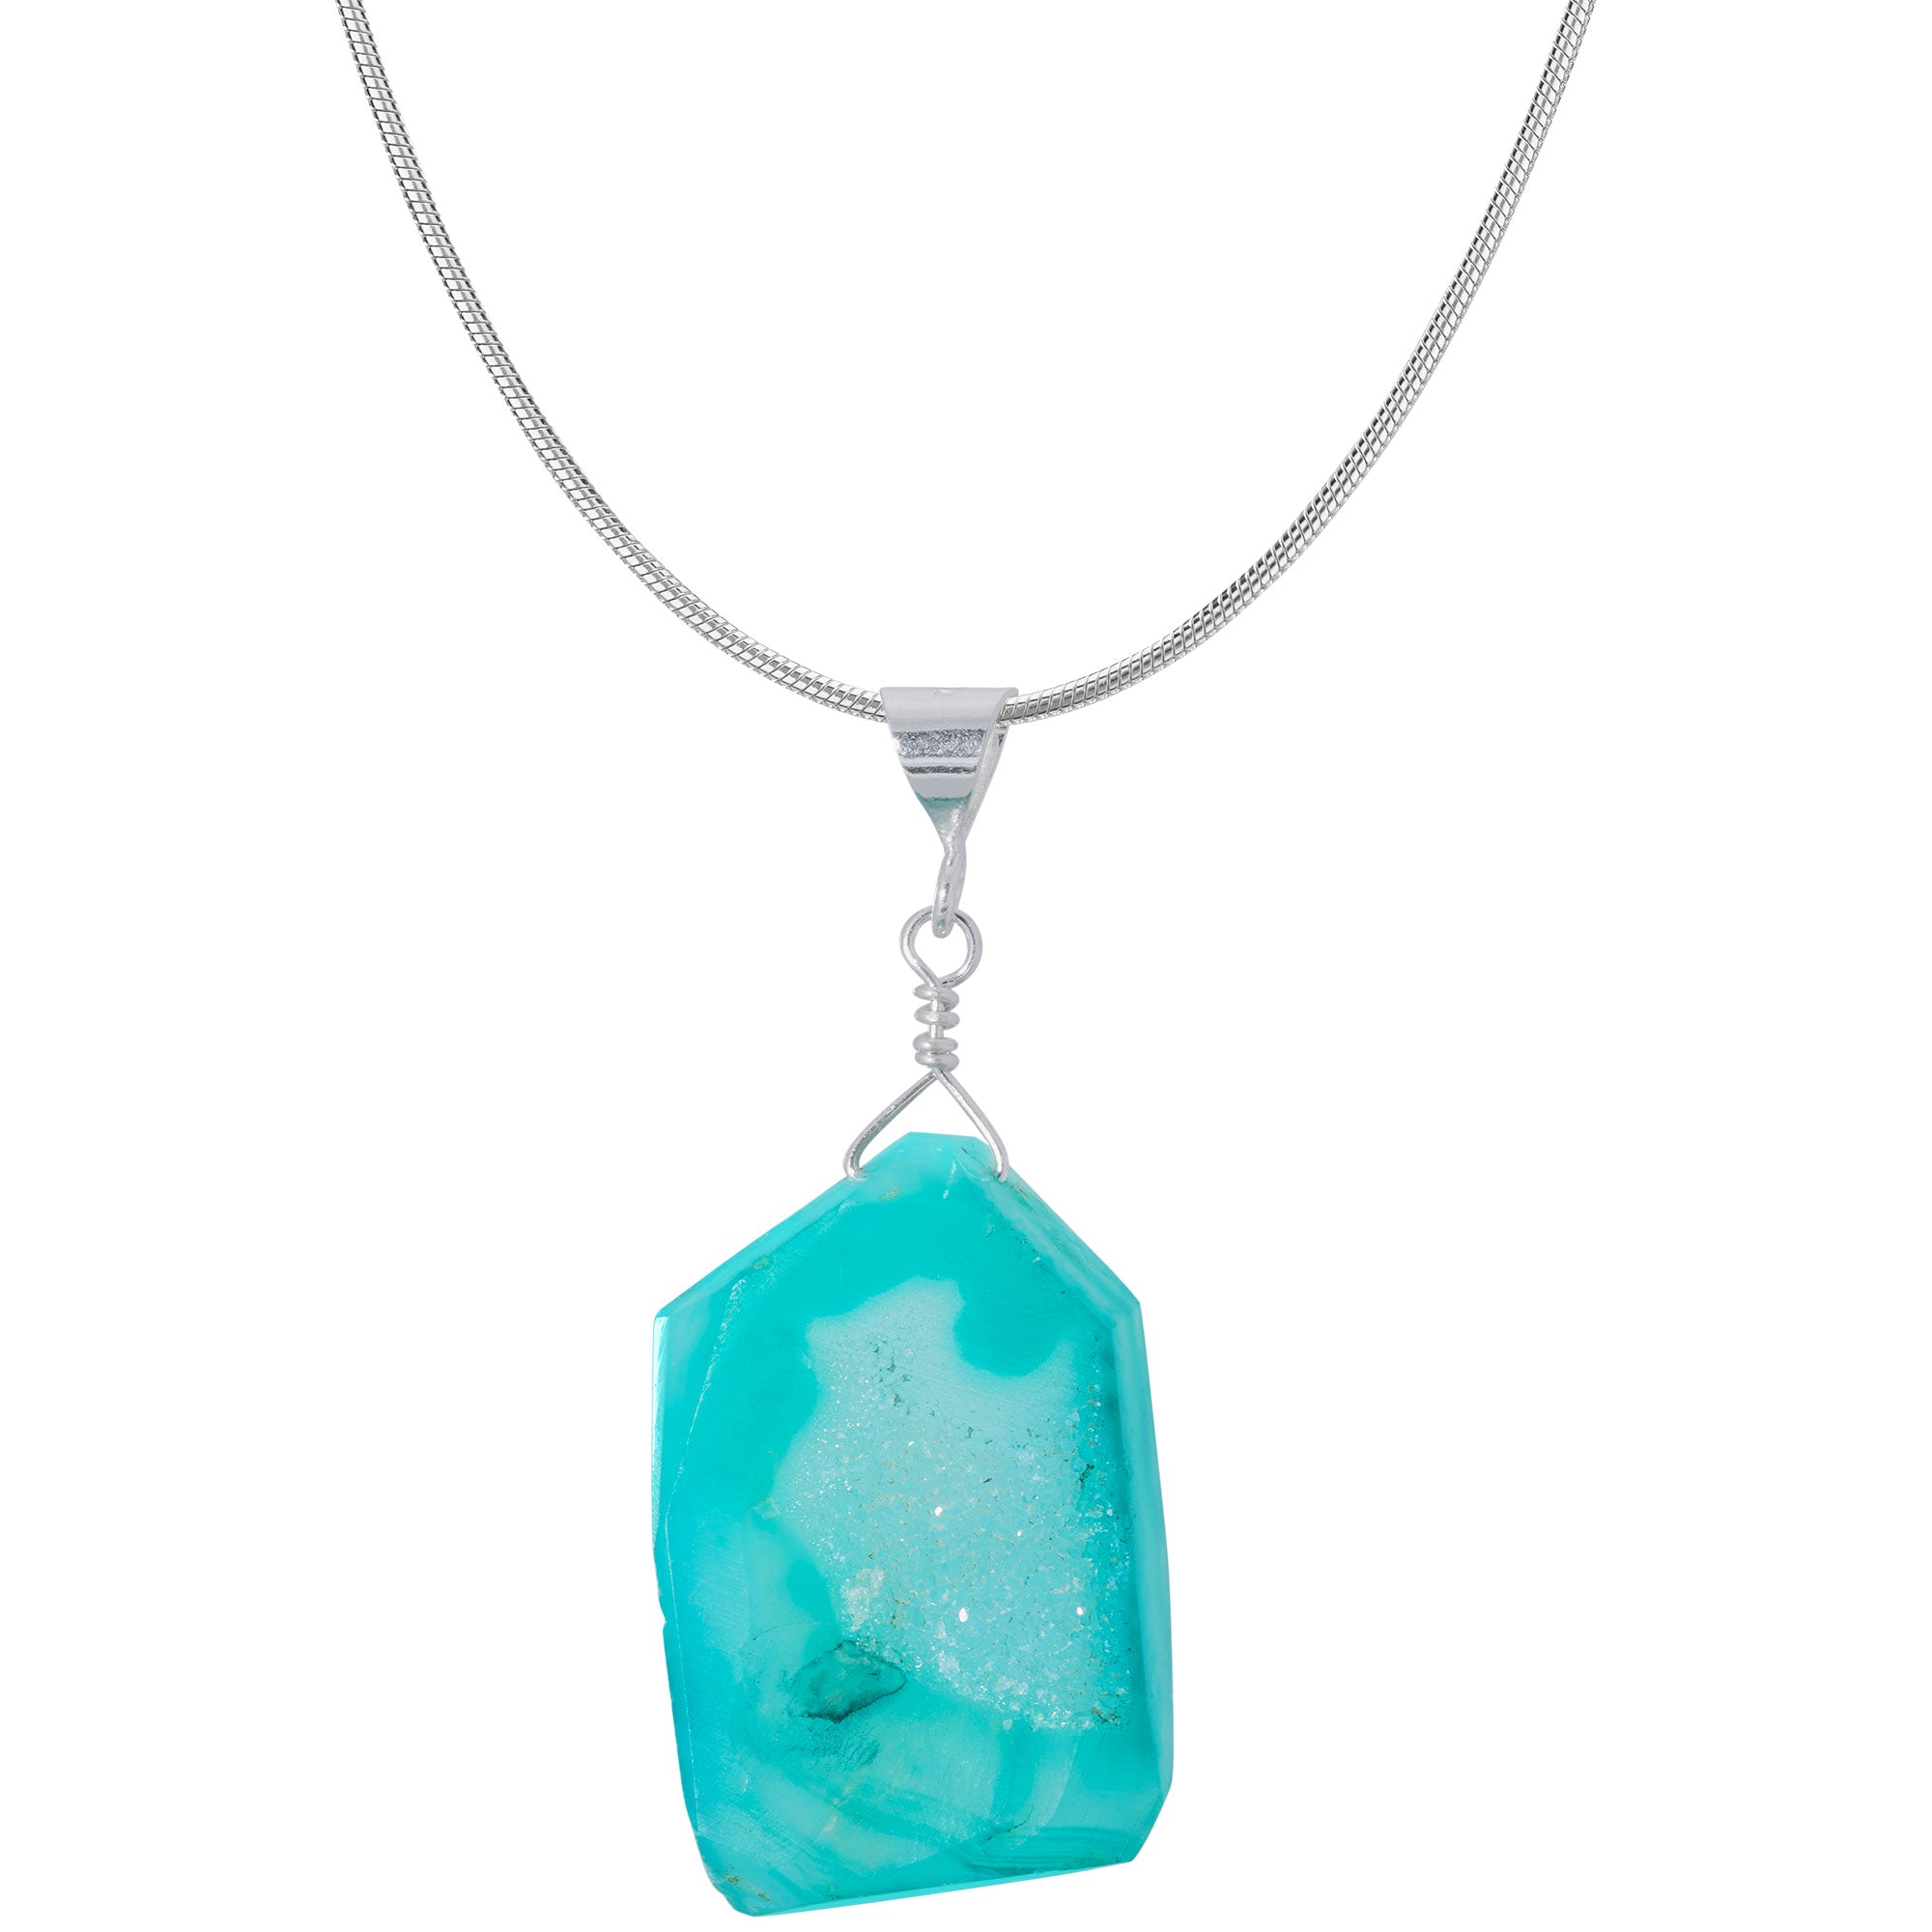 Cool Hues Sterling Silver & Druzy Necklace - Emerald Green - With Sterling Cable Chain